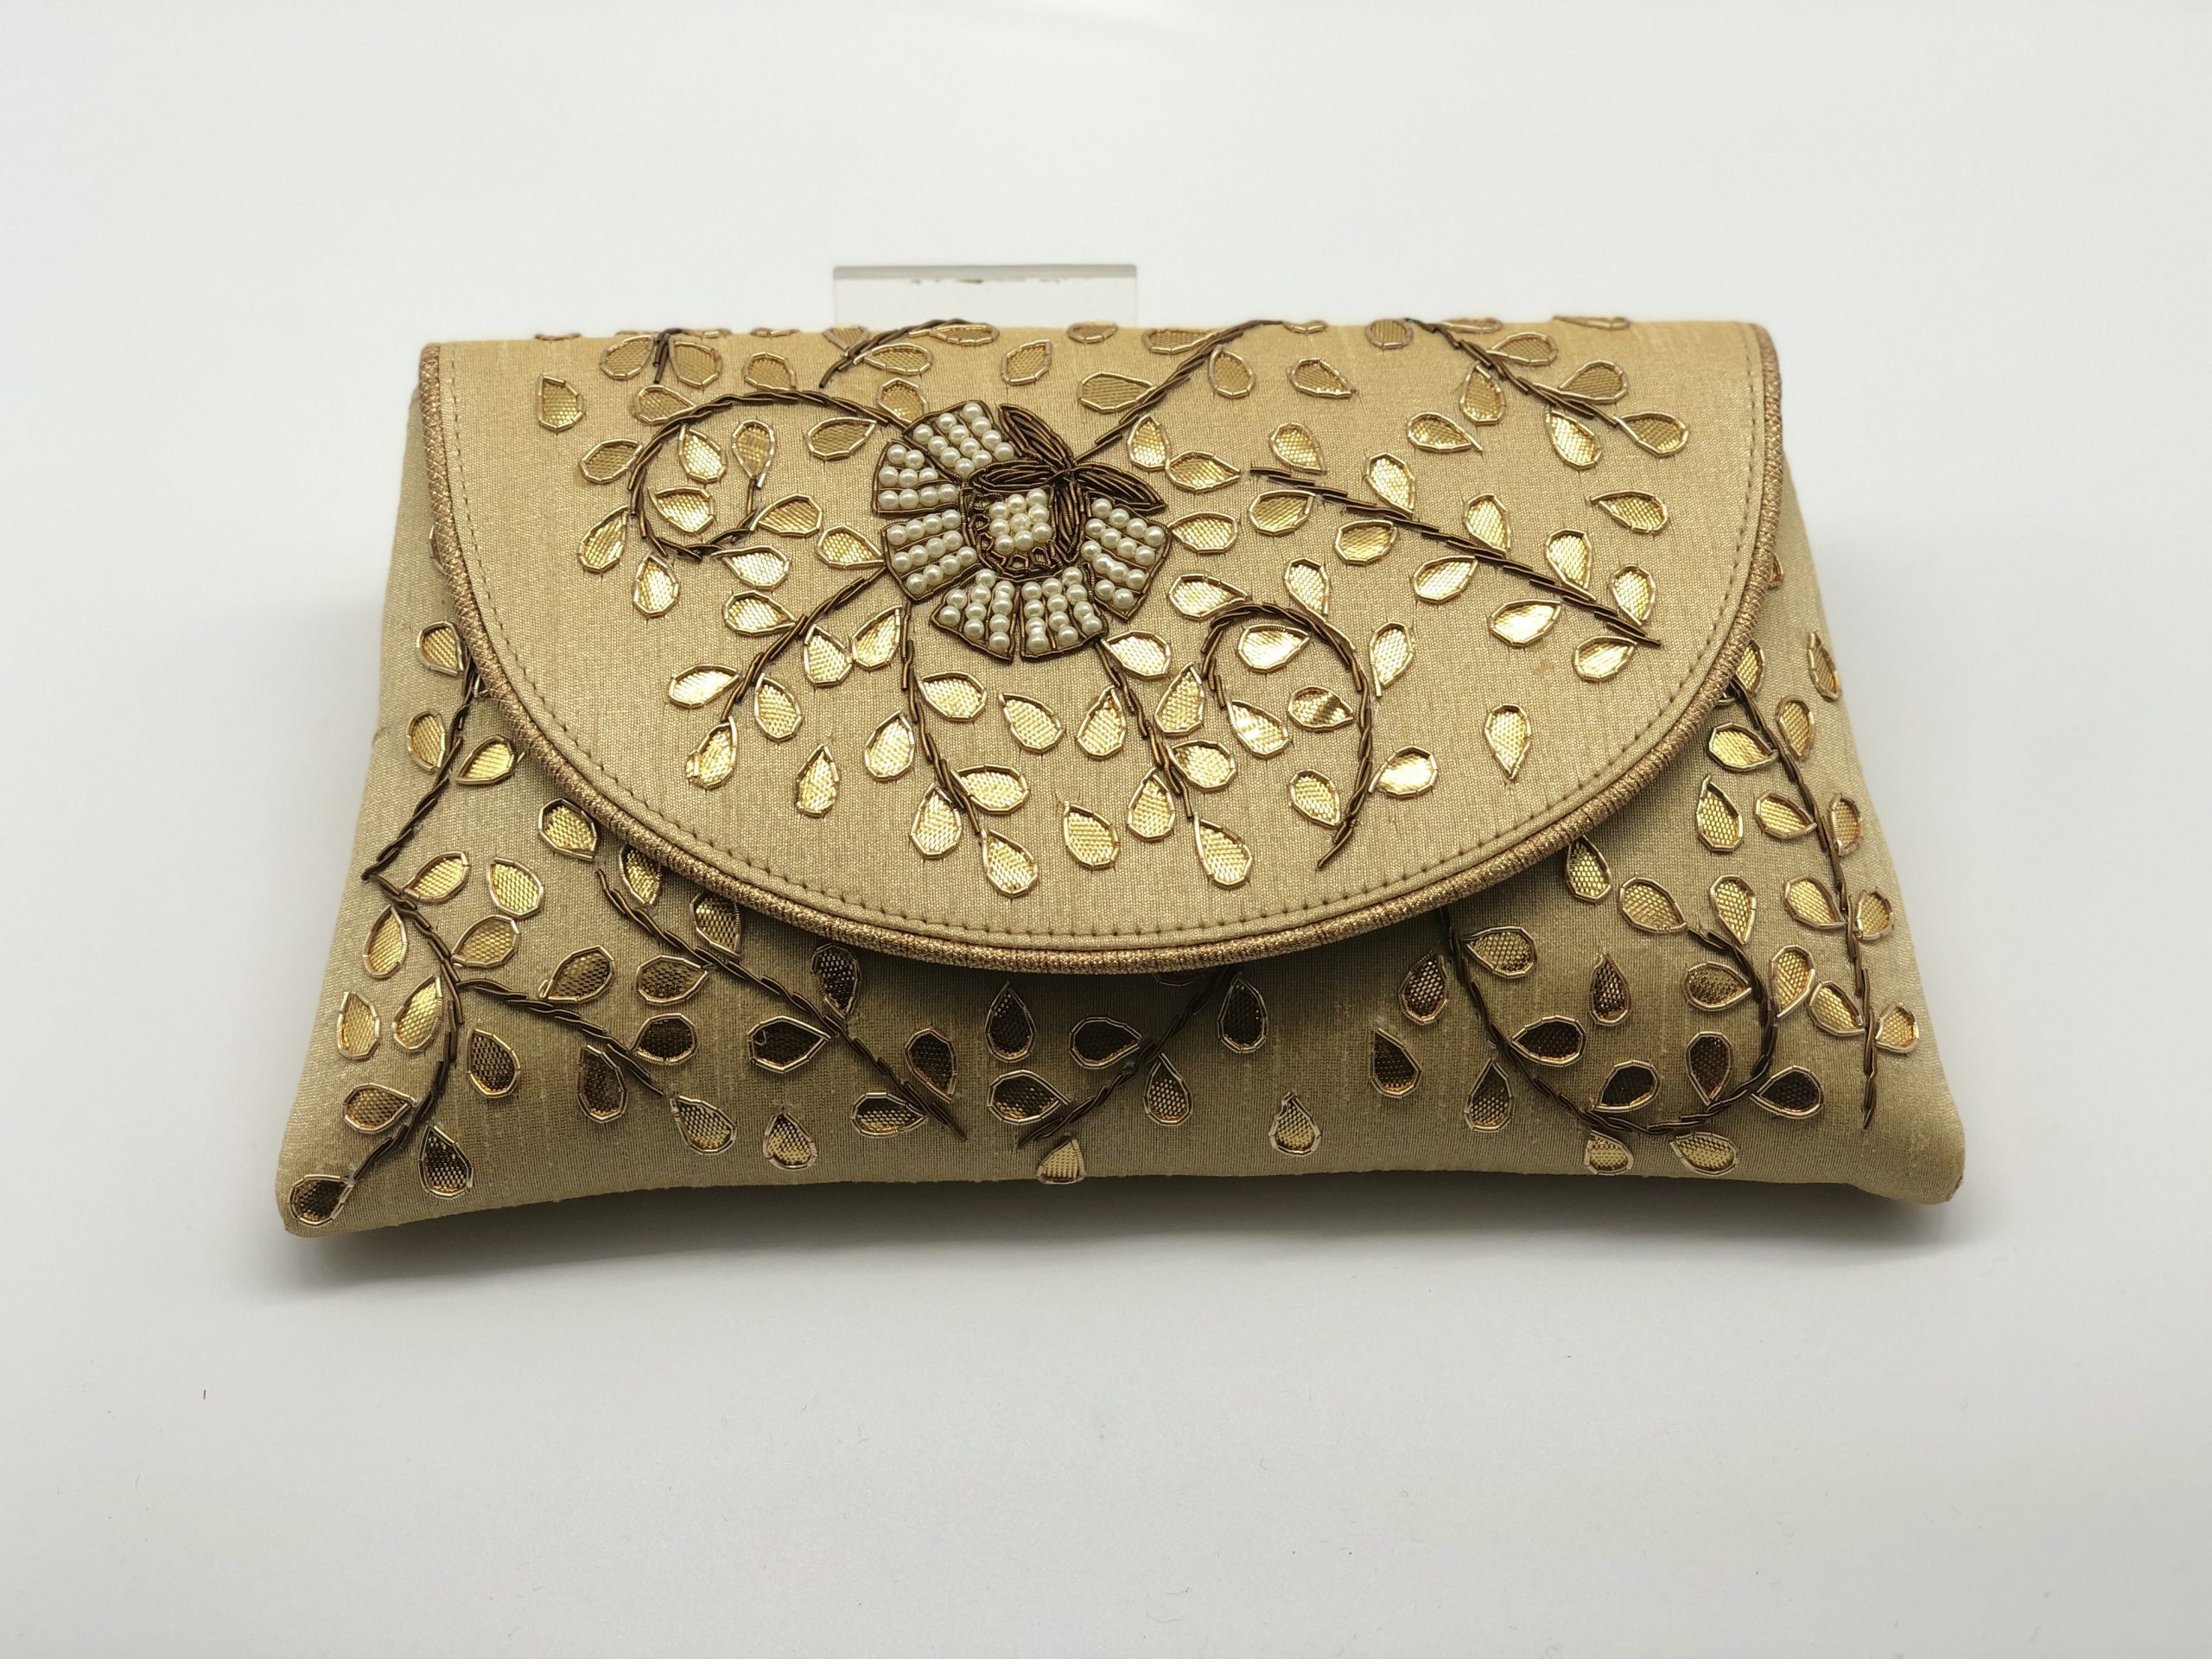 Women's Handcrafted Embroidered Clutch Bag Purse Handbag Sling Bag for  Bridal, Casual, Party and Wedding